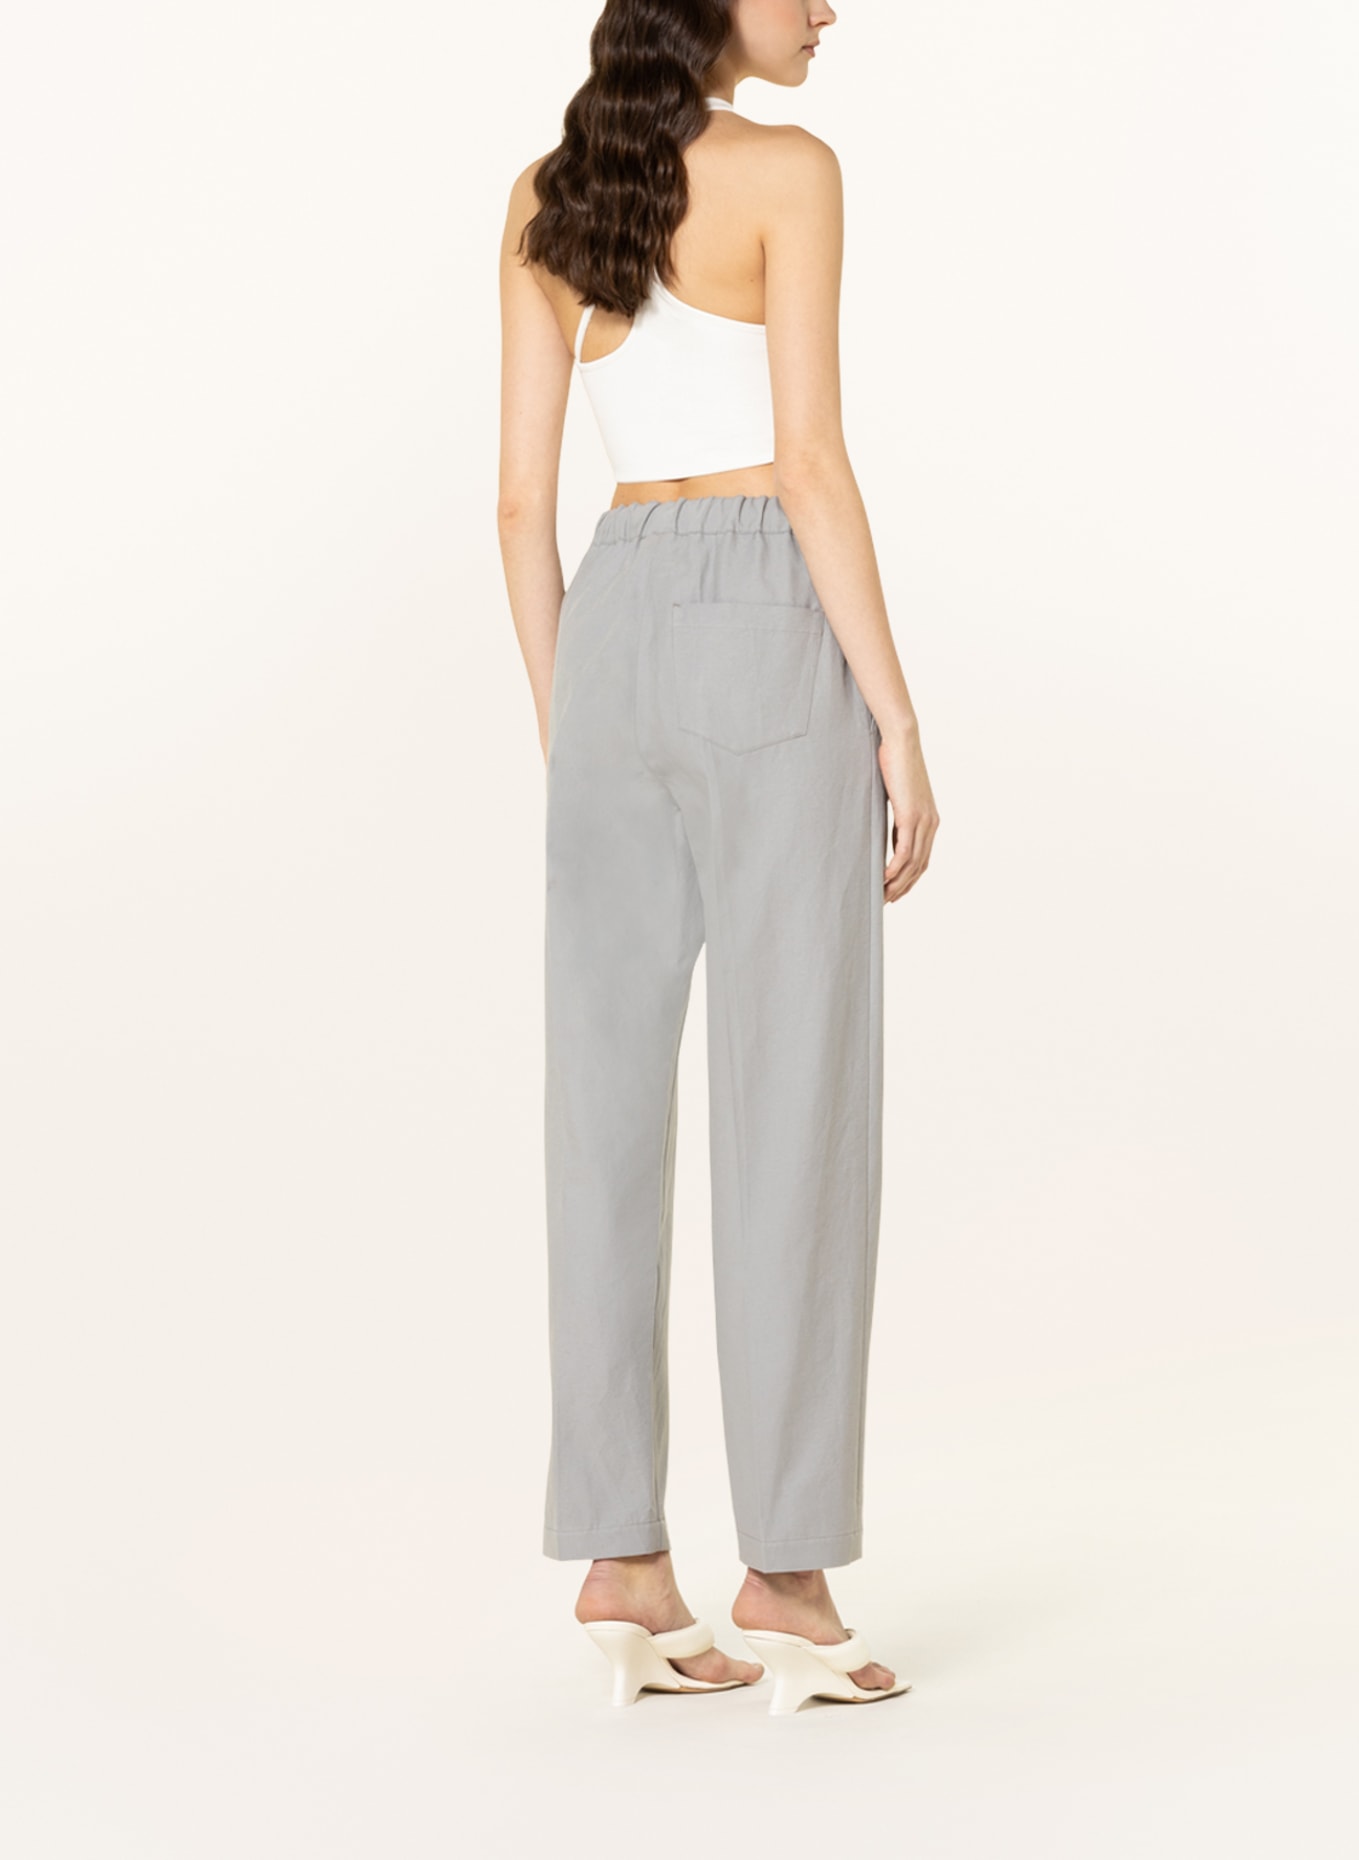 MM6 Maison Margiela Pants in jogger style, Color: LIGHT GRAY (Image 3)